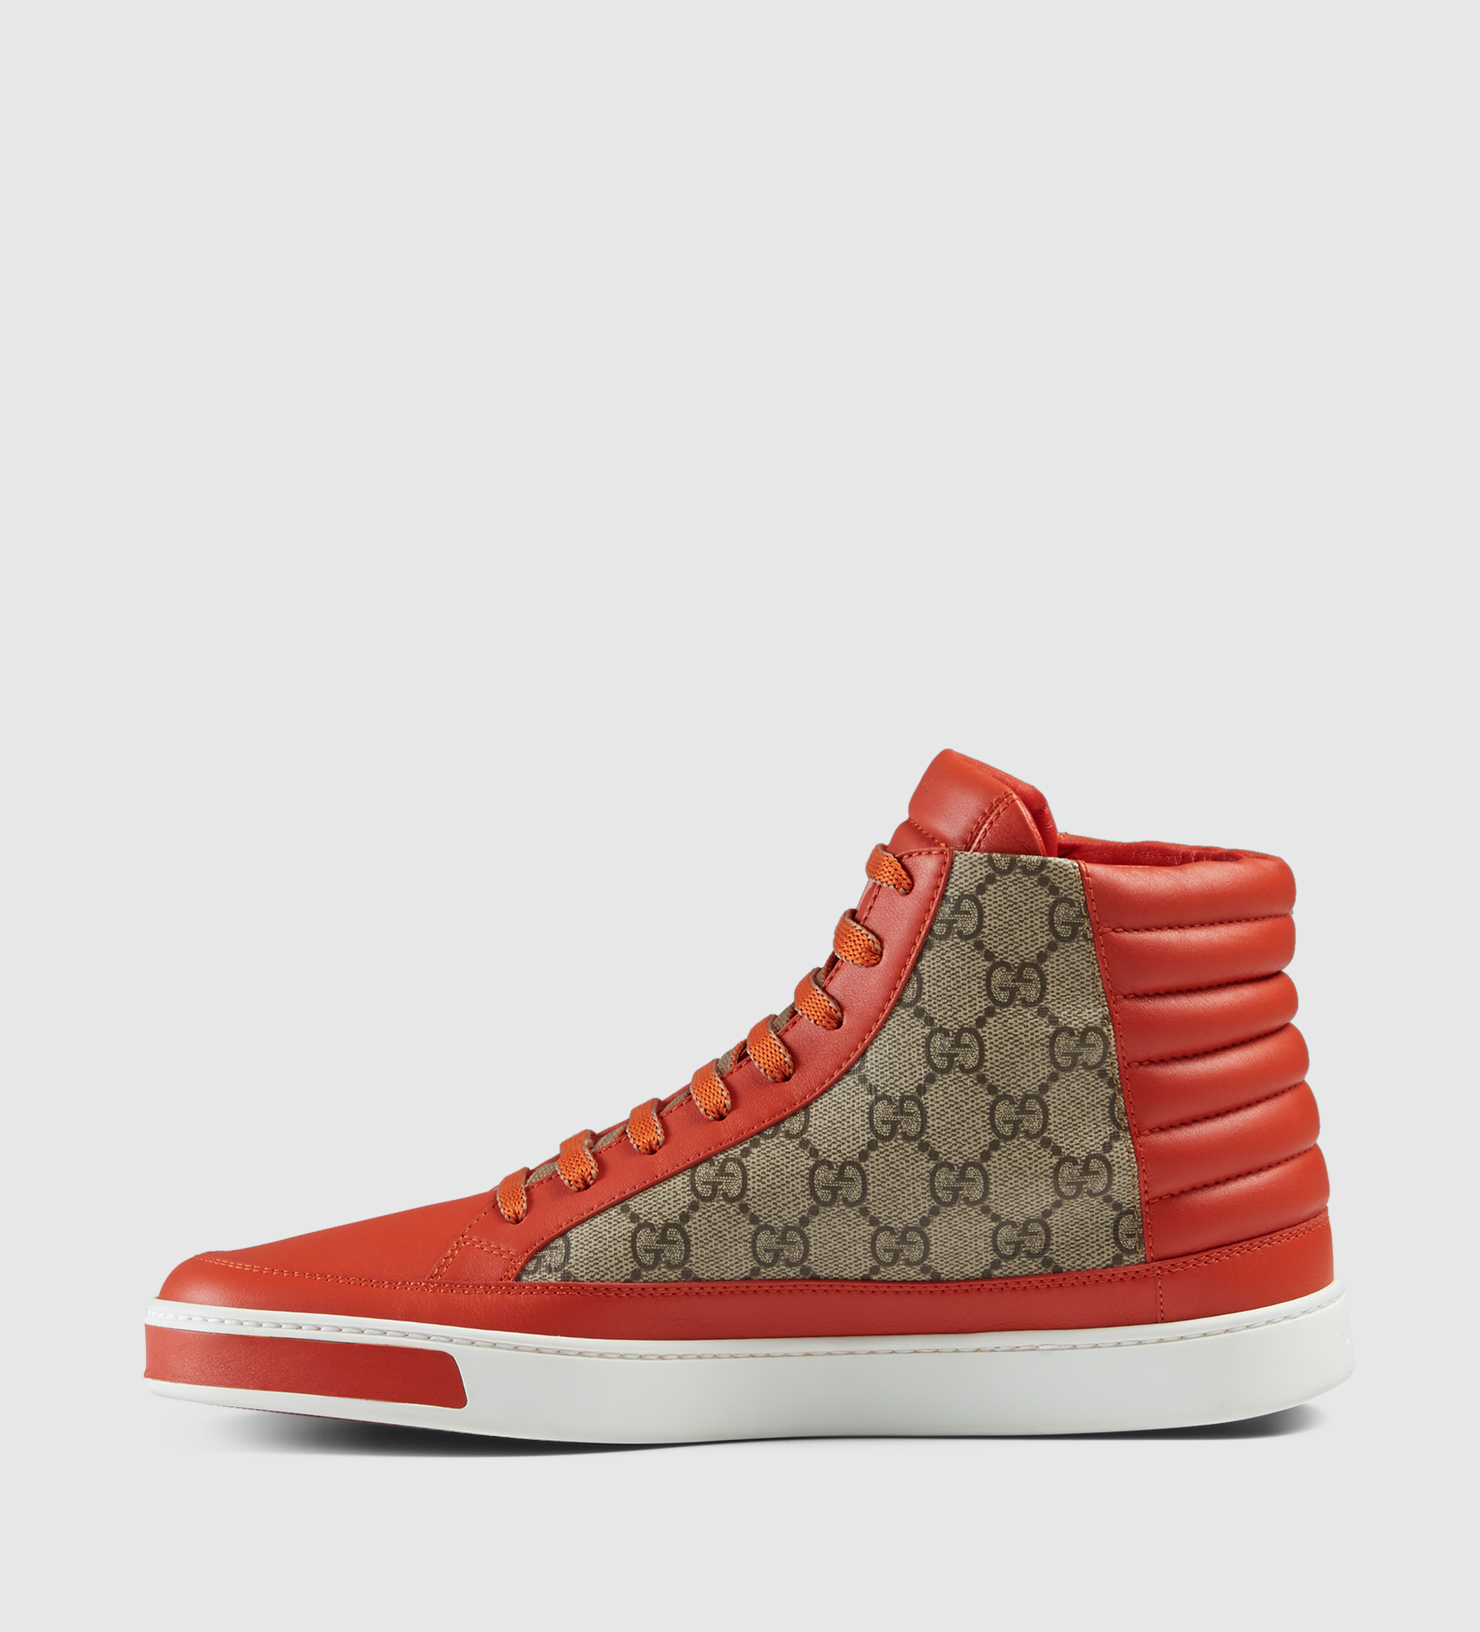 Vuggeviser Bank Descent Gucci Gg Supreme And Leather High-top Sneaker in Orange for Men - Lyst